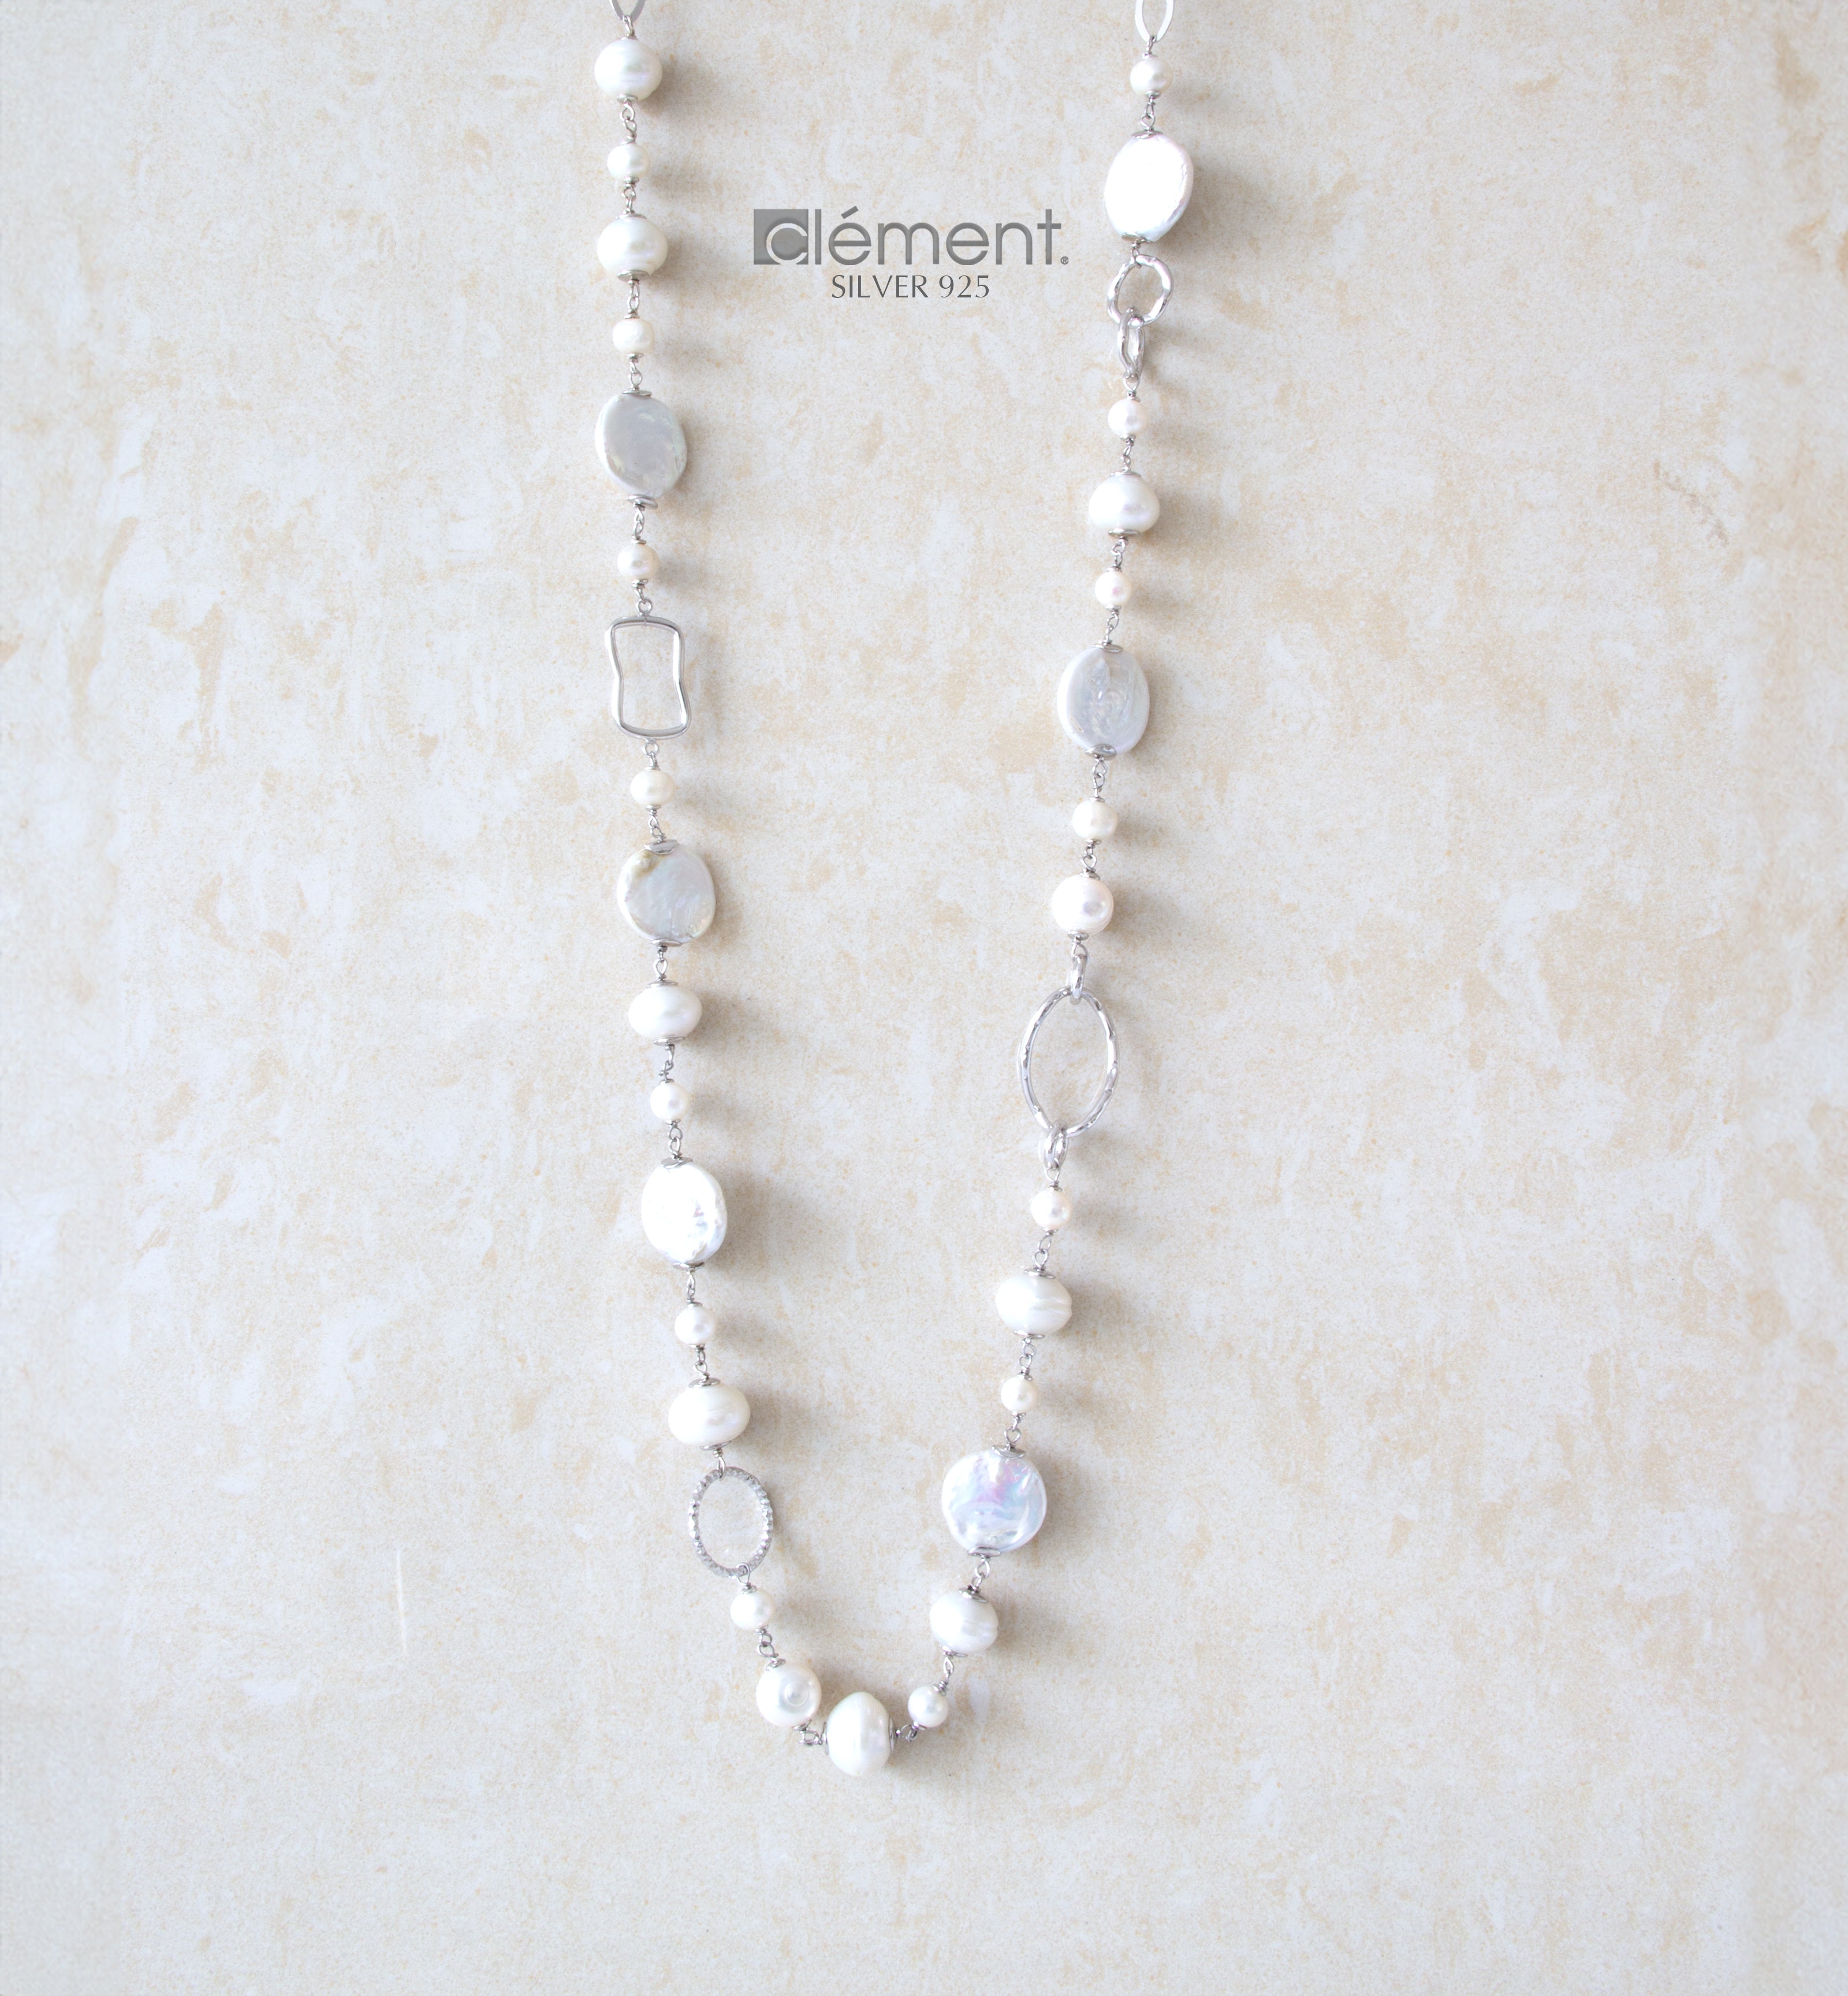 Silver 925 Long Pearl Necklace